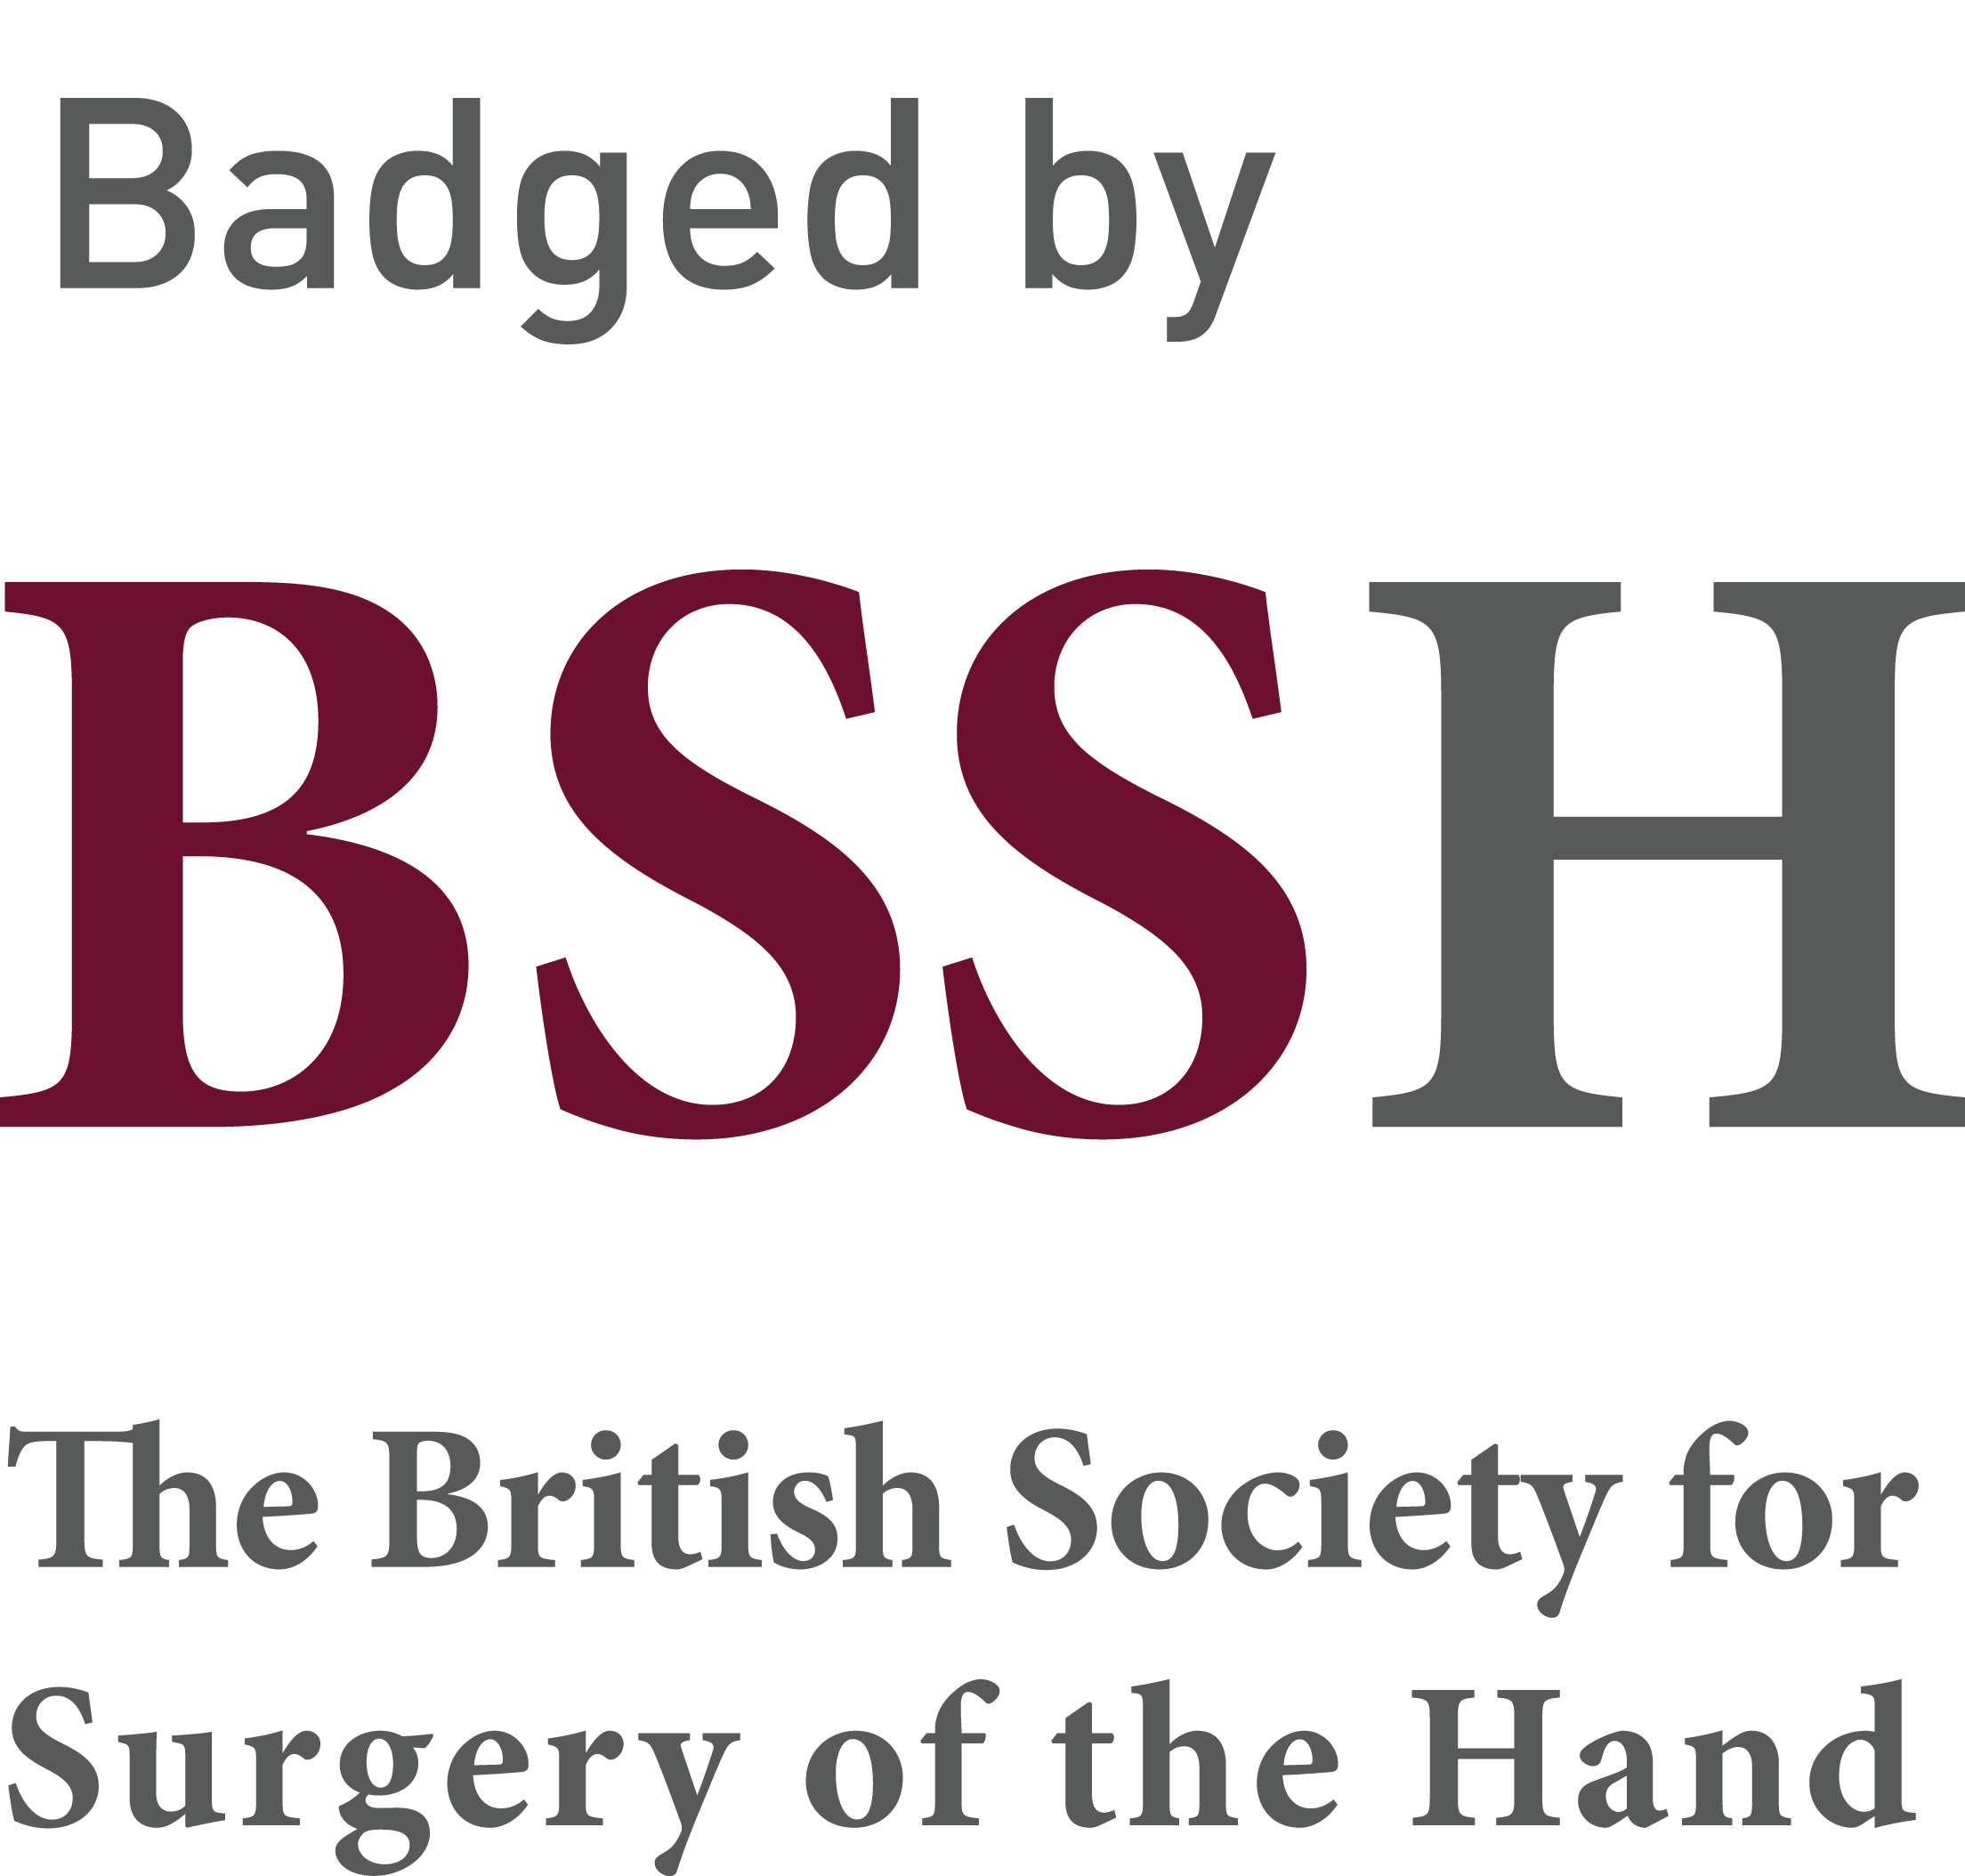 Badged By BSSH